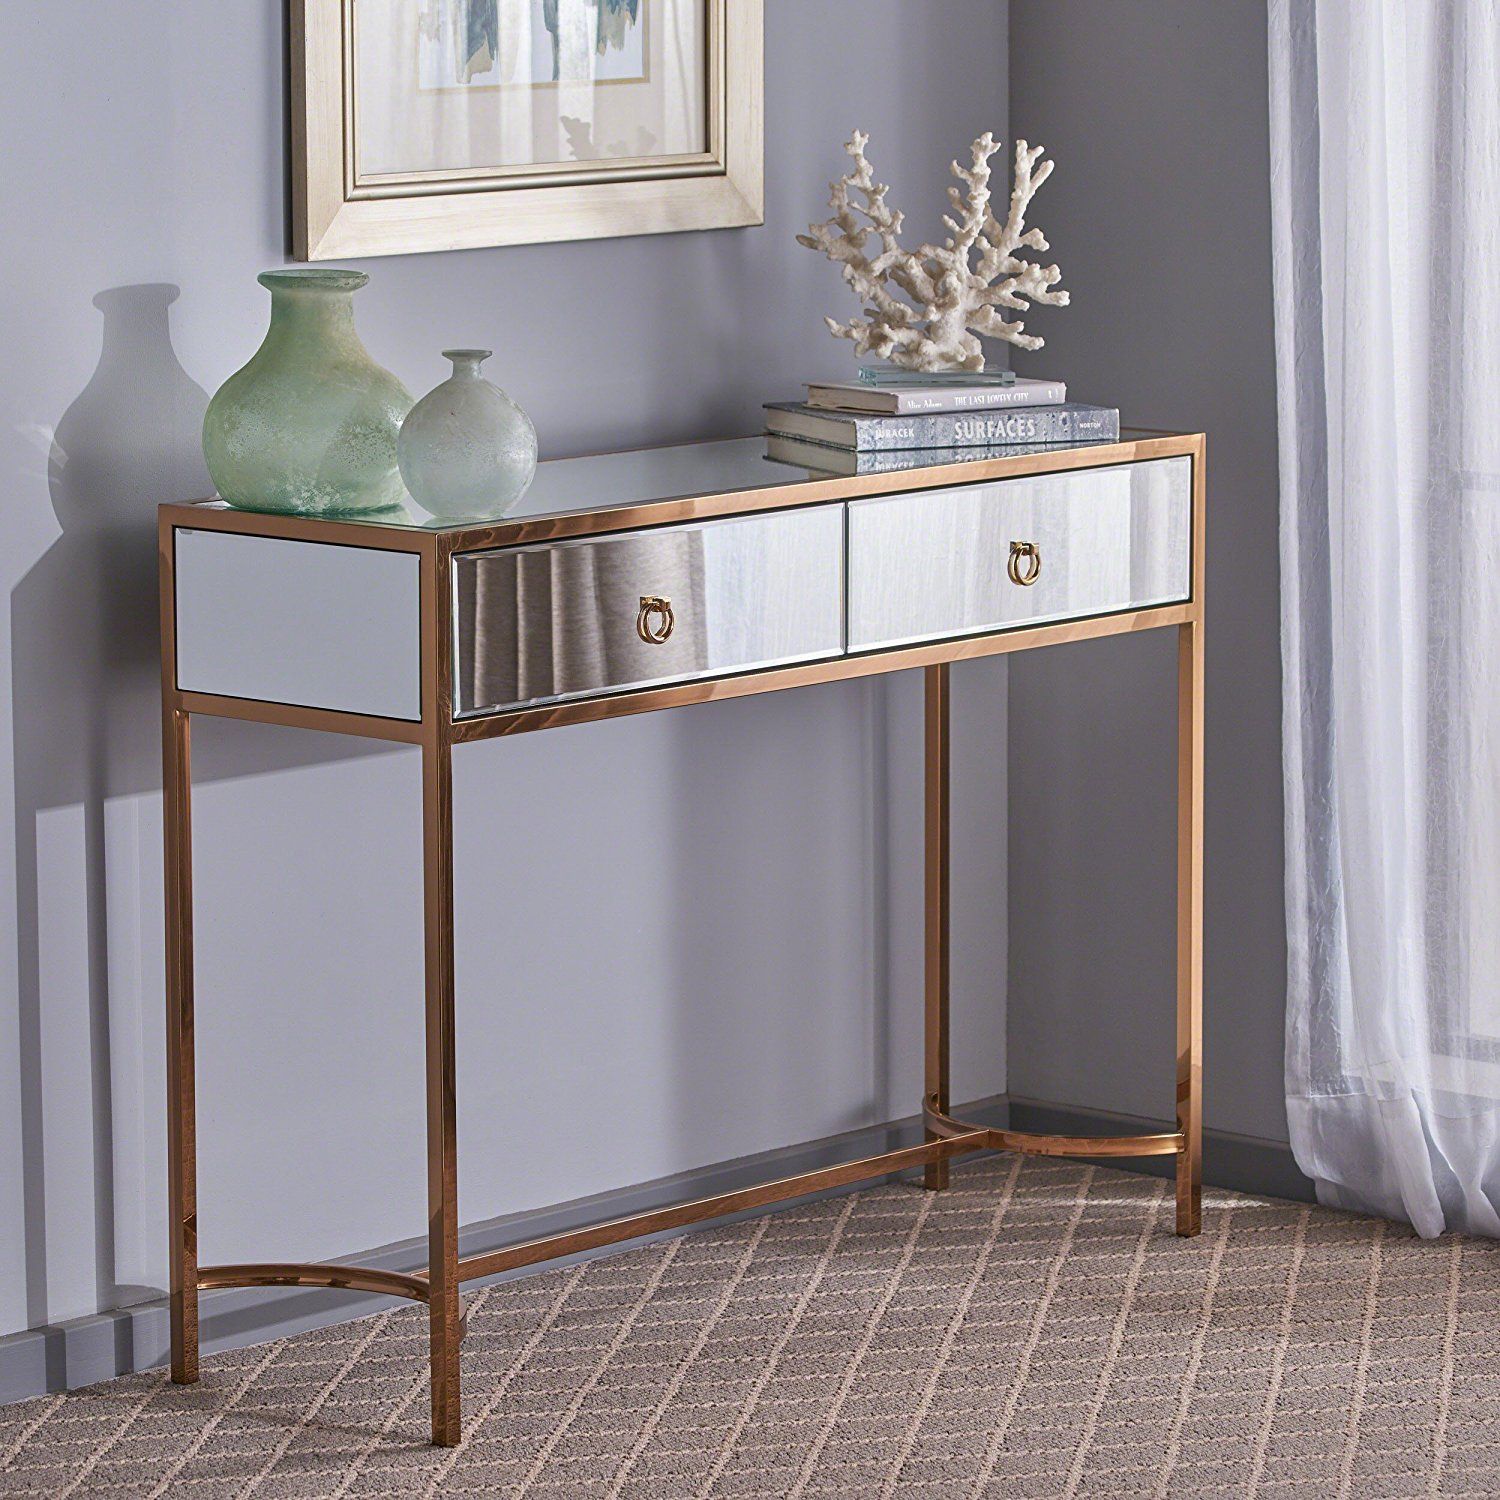 Cheap Gold Mirrored Console, Find Gold Mirrored Console Deals On Line Intended For Mirrored Modern Console Tables (View 1 of 20)